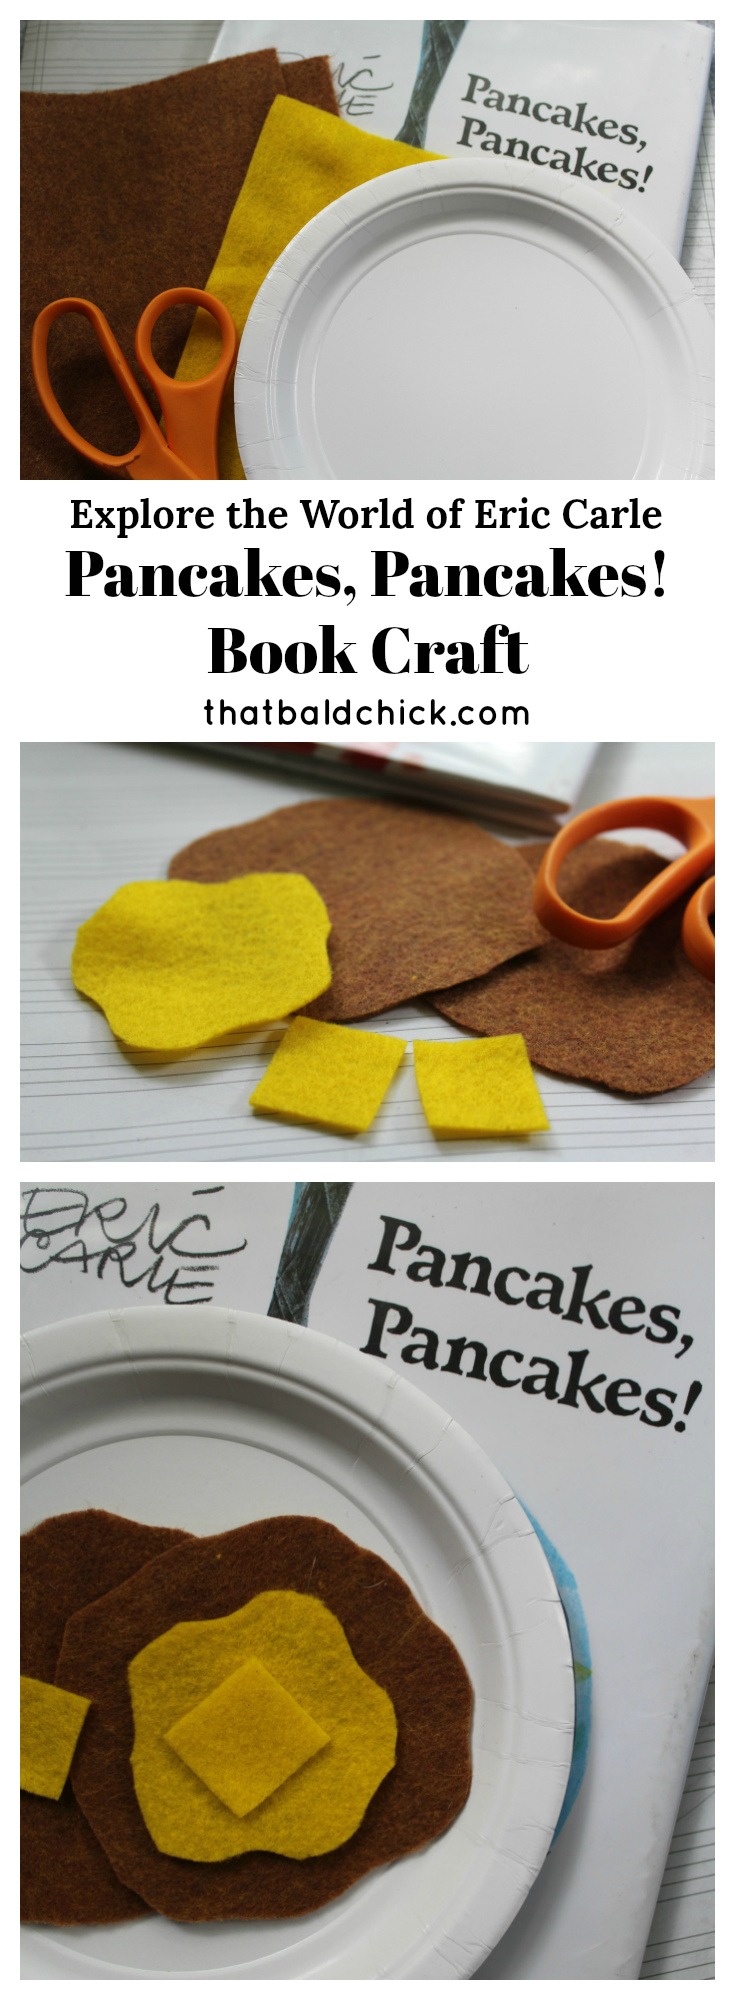 Explore the world of Eric Carle and make this fun Pancakes, Pancakes! Book Craft. Supply list and instructions at thatbaldchick.com